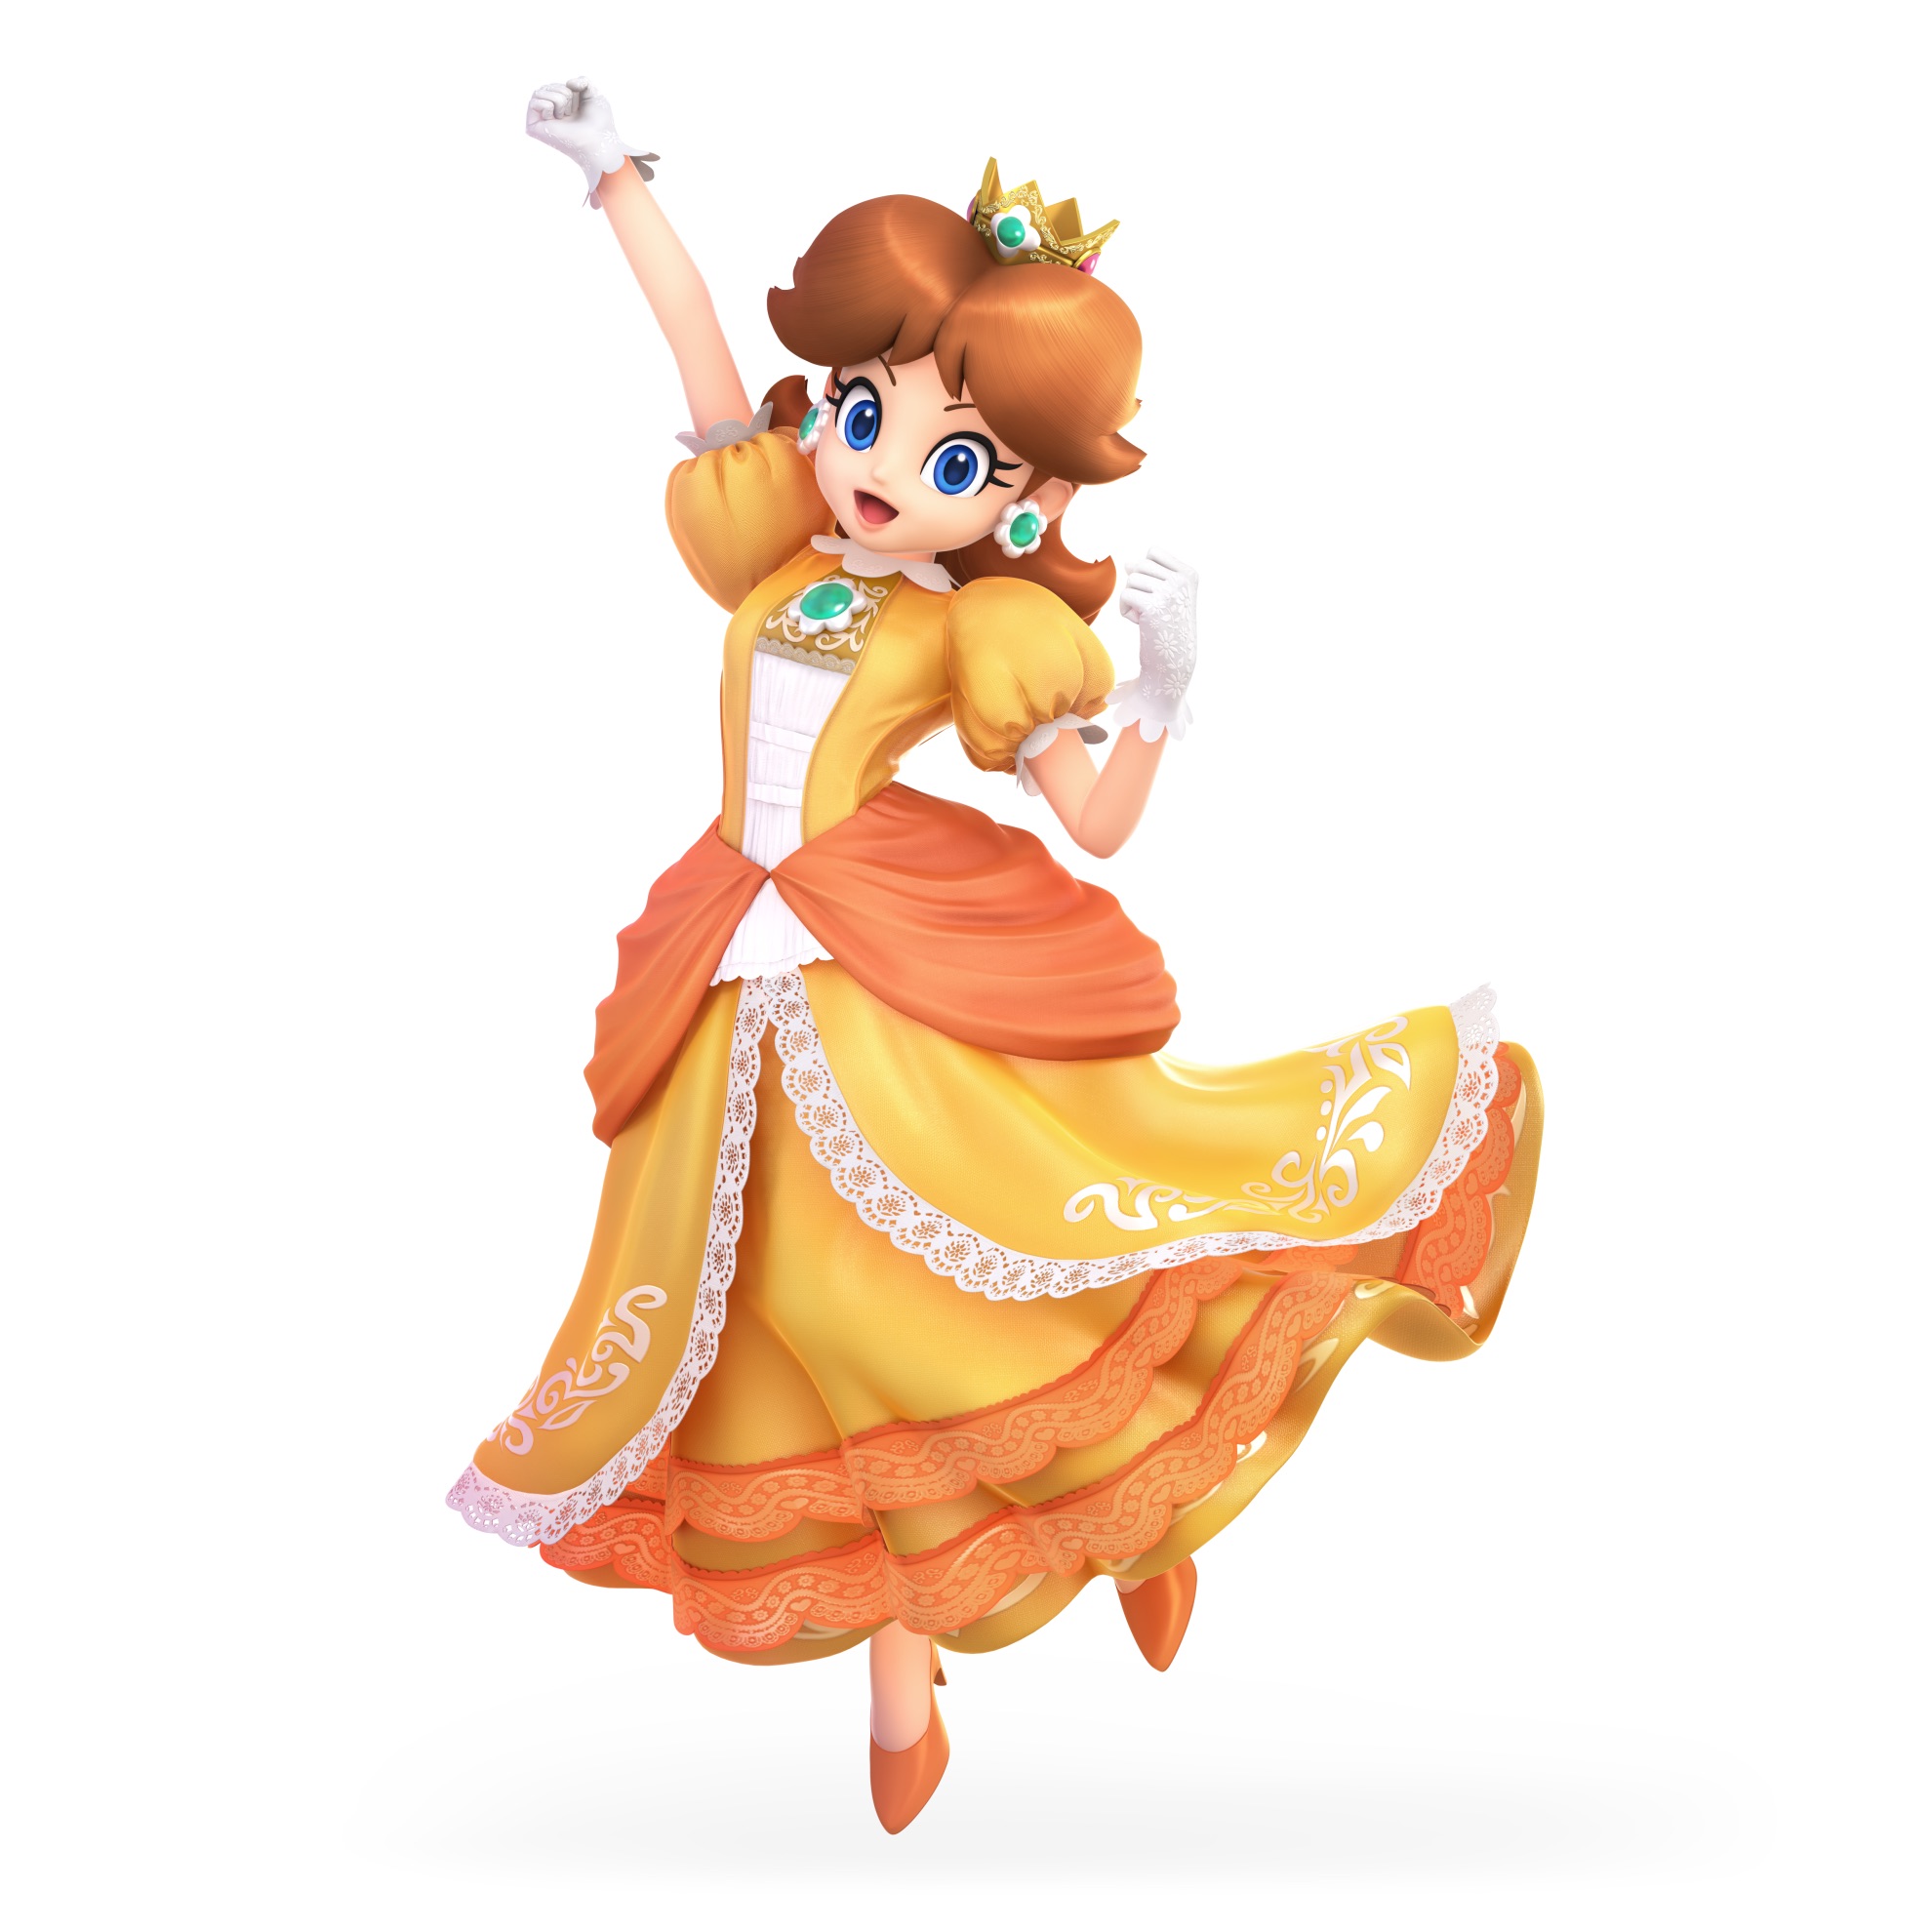 Daisy Super Smash Bros. Ultimate Character Render